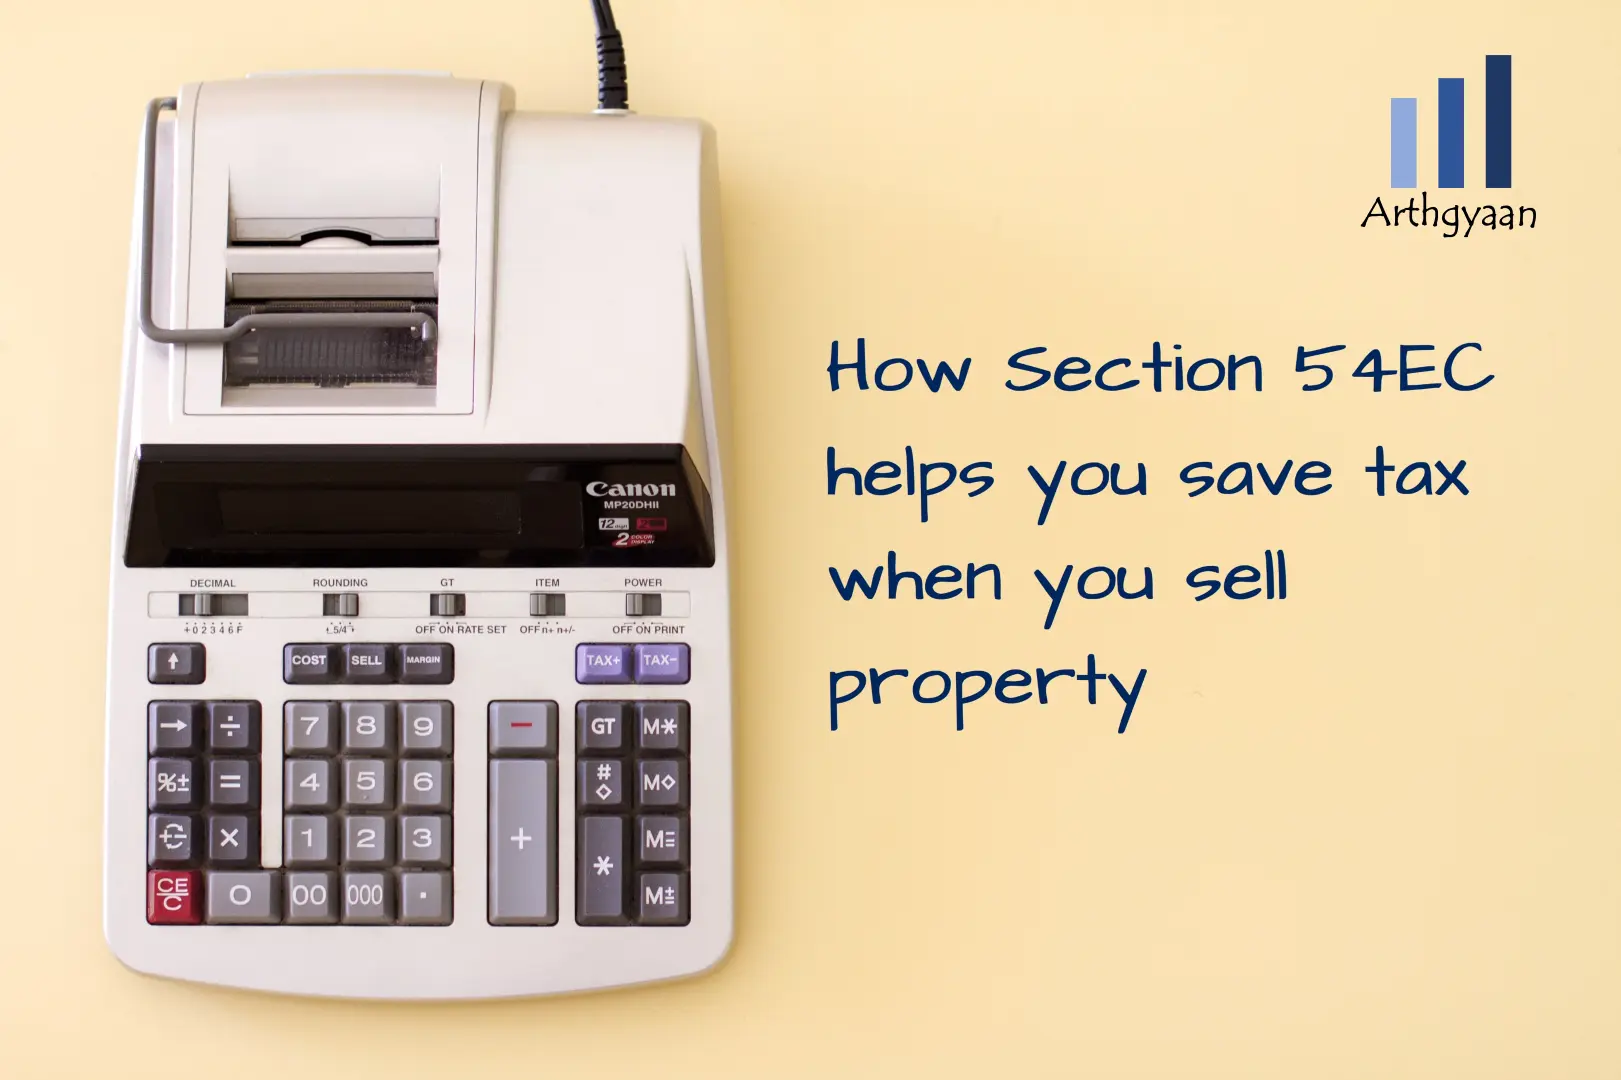 How Section 54EC helps you save tax when you sell property